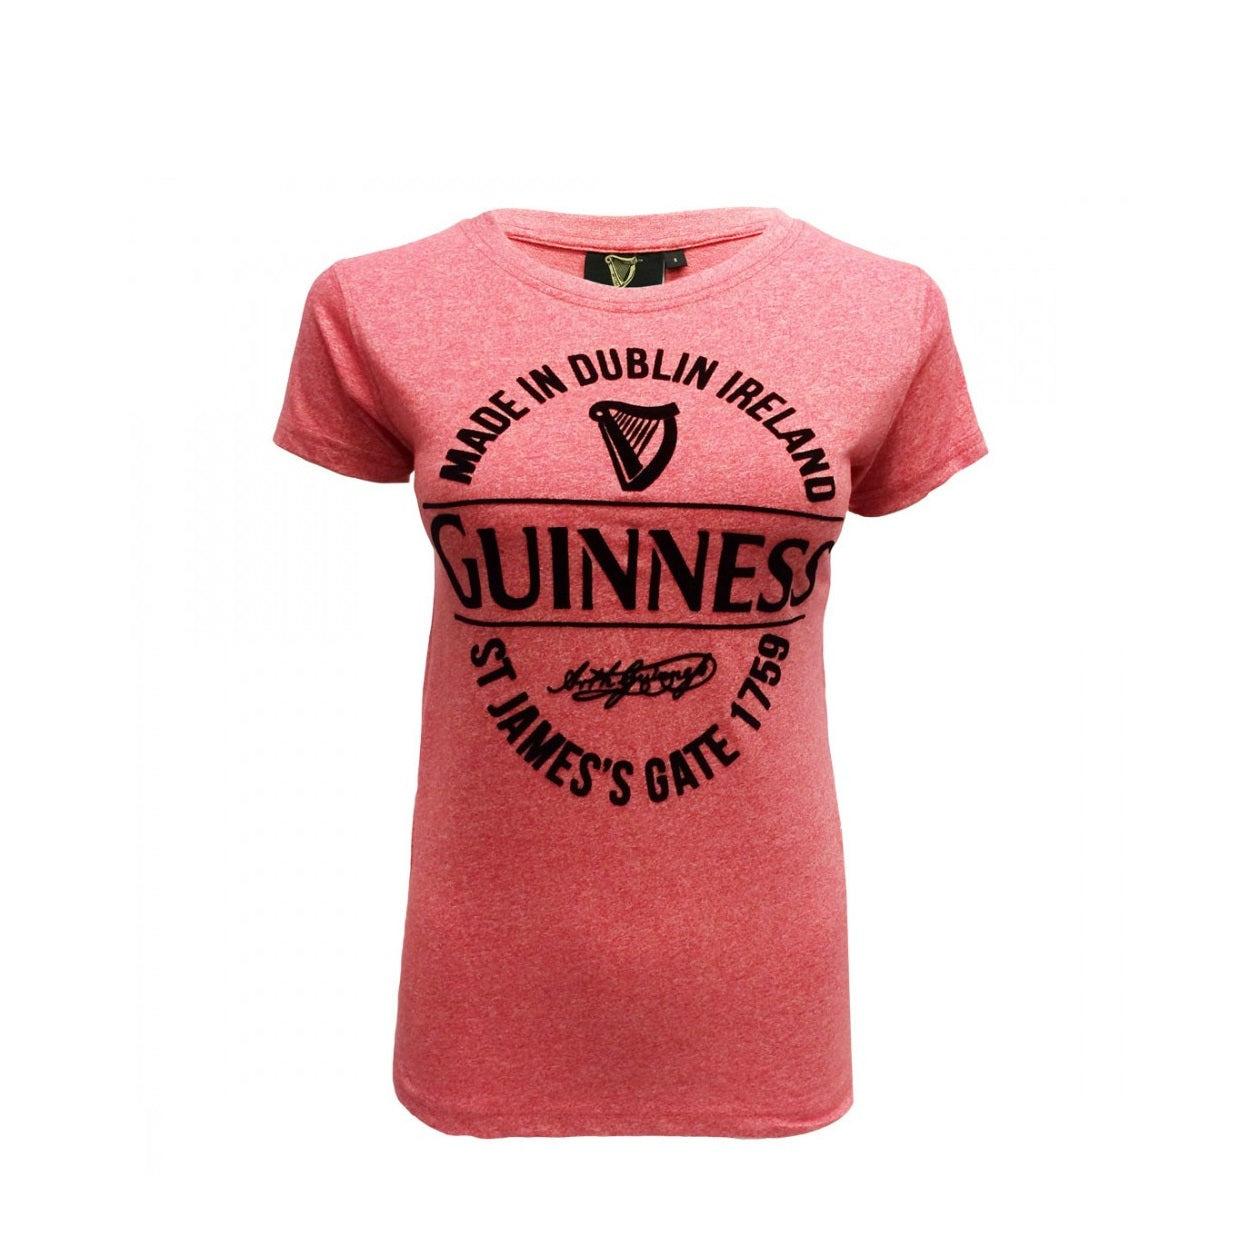 Guinness Red Grindle Stamp Ladies T-Shirt  This red grindle ladies T-shirt is part of the Guinness Official Merchandise Collection. The shirt has a flock print stamp style label featuring St. James gate. It is a classic fit for style and comfort.  - Official Guinness merchandise - Ladies fit t-shirt - Red - Pink